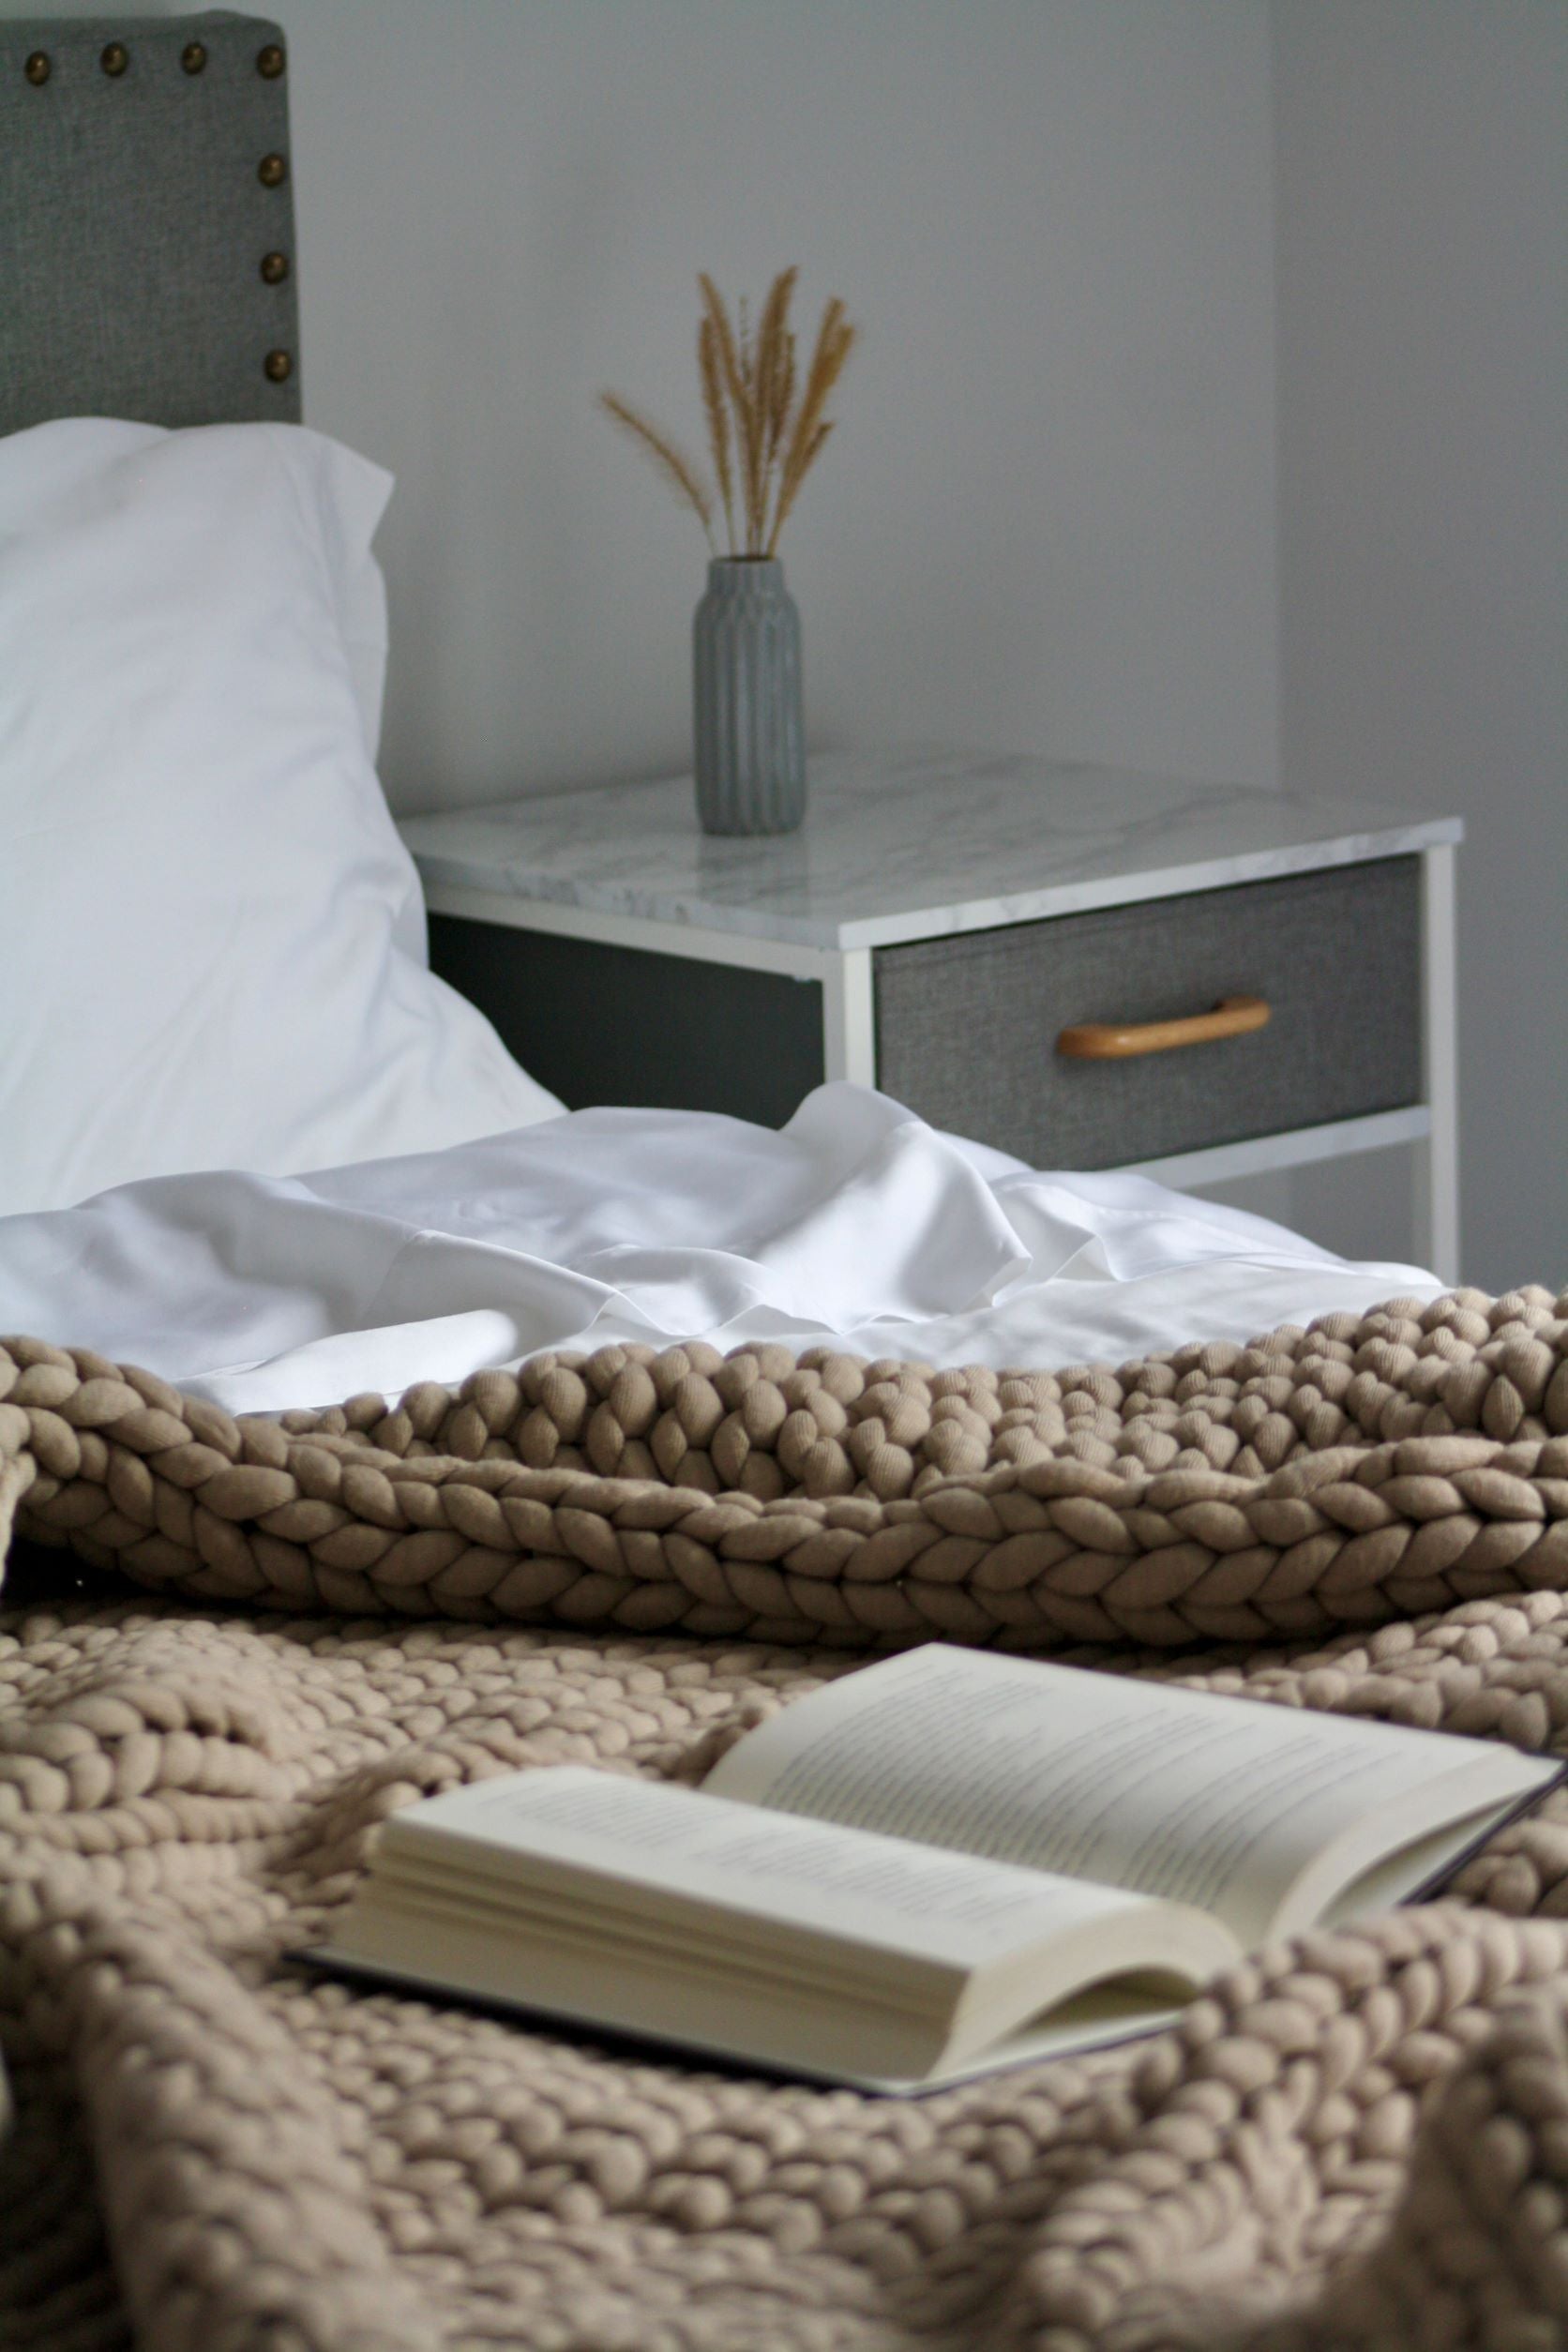 Book laying open on cozy bed